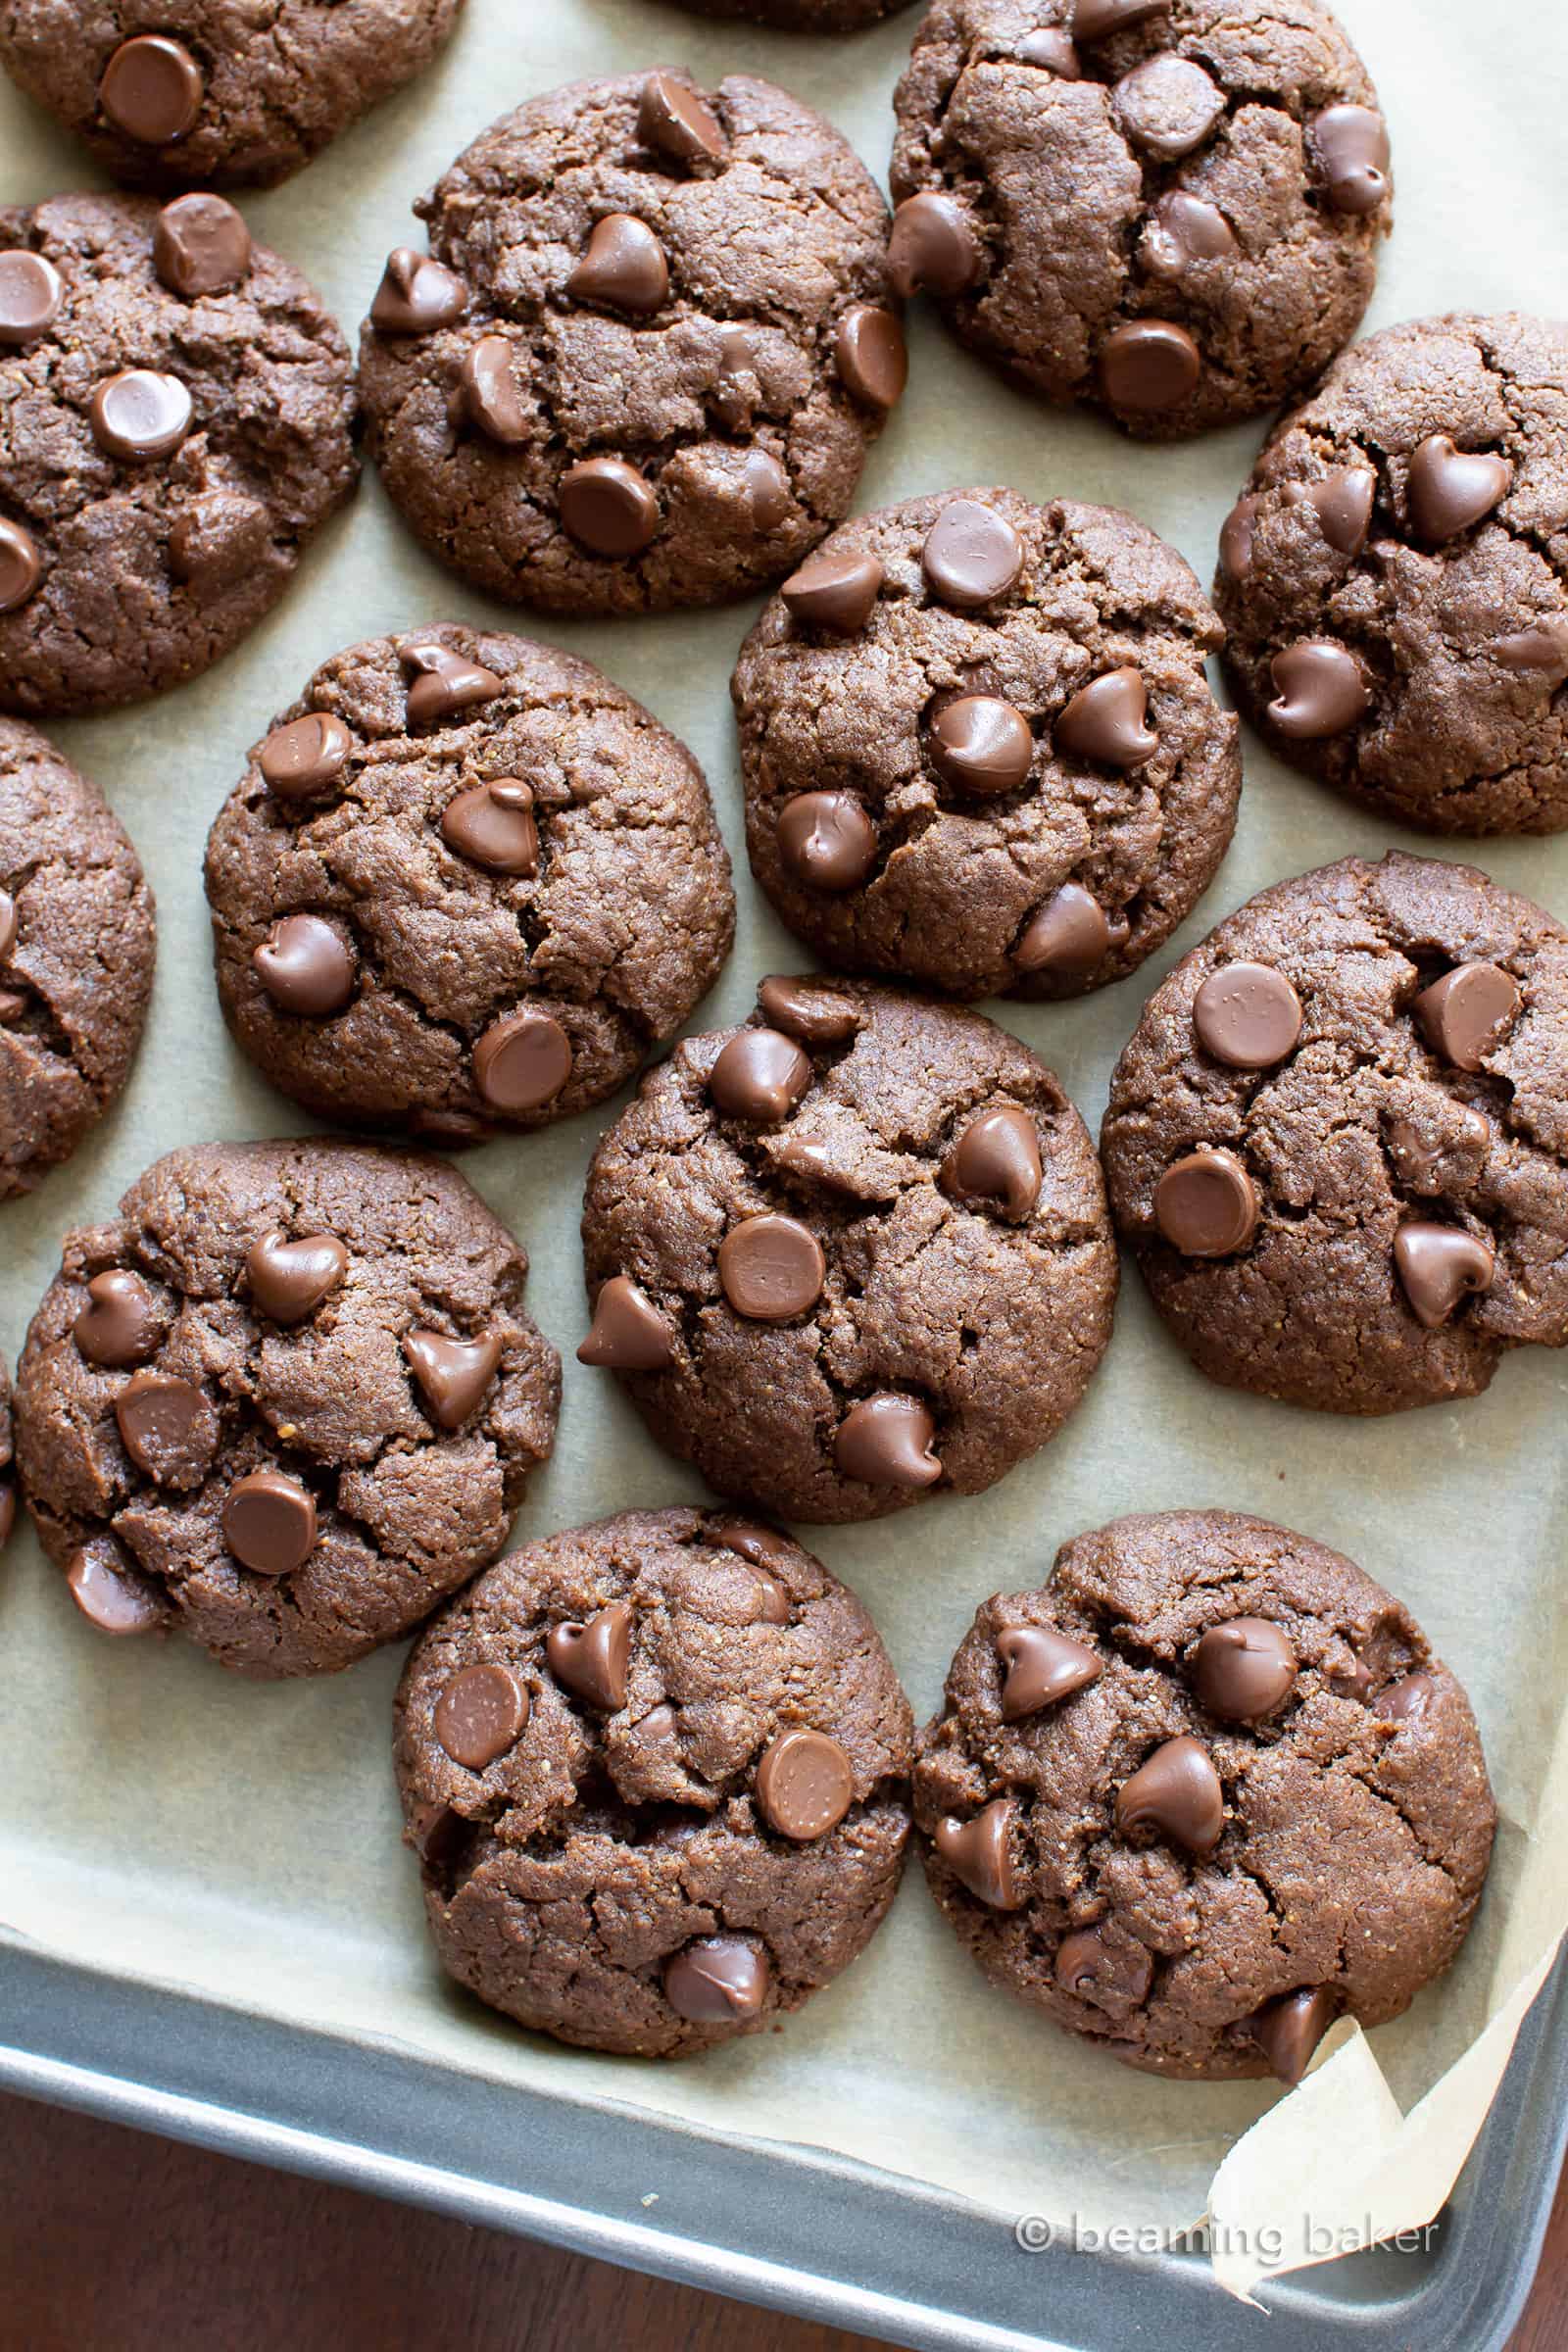 Chewy Gluten Free Chocolate Tahini Cookies (Vegan, GF): this flourless chocolate chip cookie recipe is Paleo! The best double chocolate chip cookies—deliciously chewy & decadent. #GlutenFree #Tahini #Vegan #Paleo #Flourless #Cookies | Recipe at BeamingBaker.com